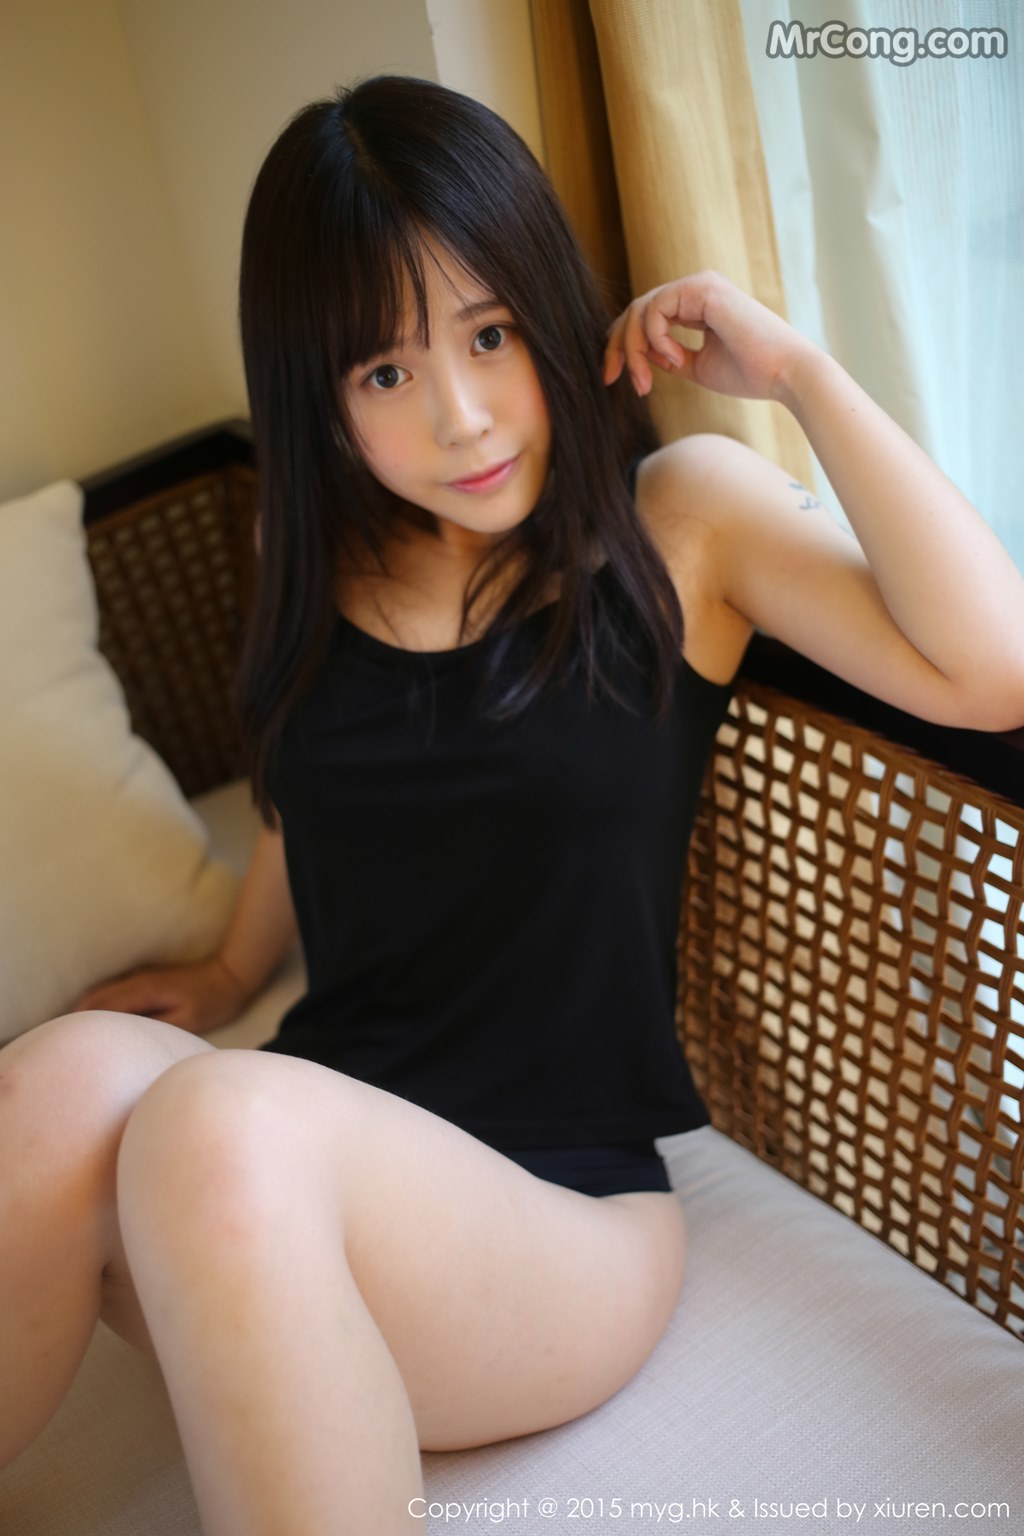 MyGirl Vol.173: Model Evelyn (艾莉) (94 pictures) photo 2-7